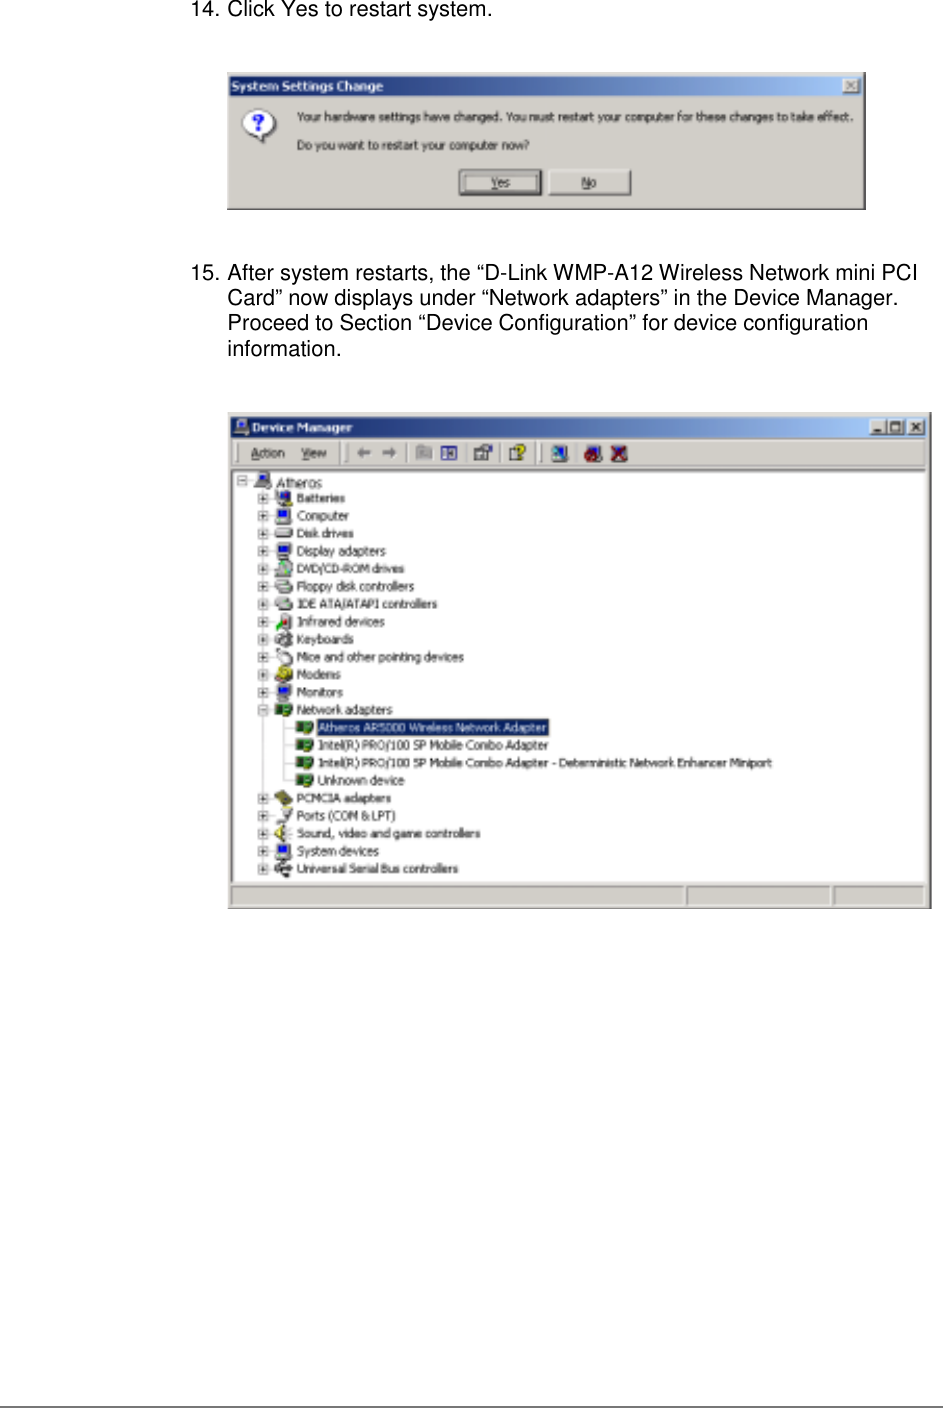 14. Click Yes to restart system.15. After system restarts, the “D-Link WMP-A12 Wireless Network mini PCICard” now displays under “Network adapters” in the Device Manager.Proceed to Section “Device Configuration” for device configurationinformation.